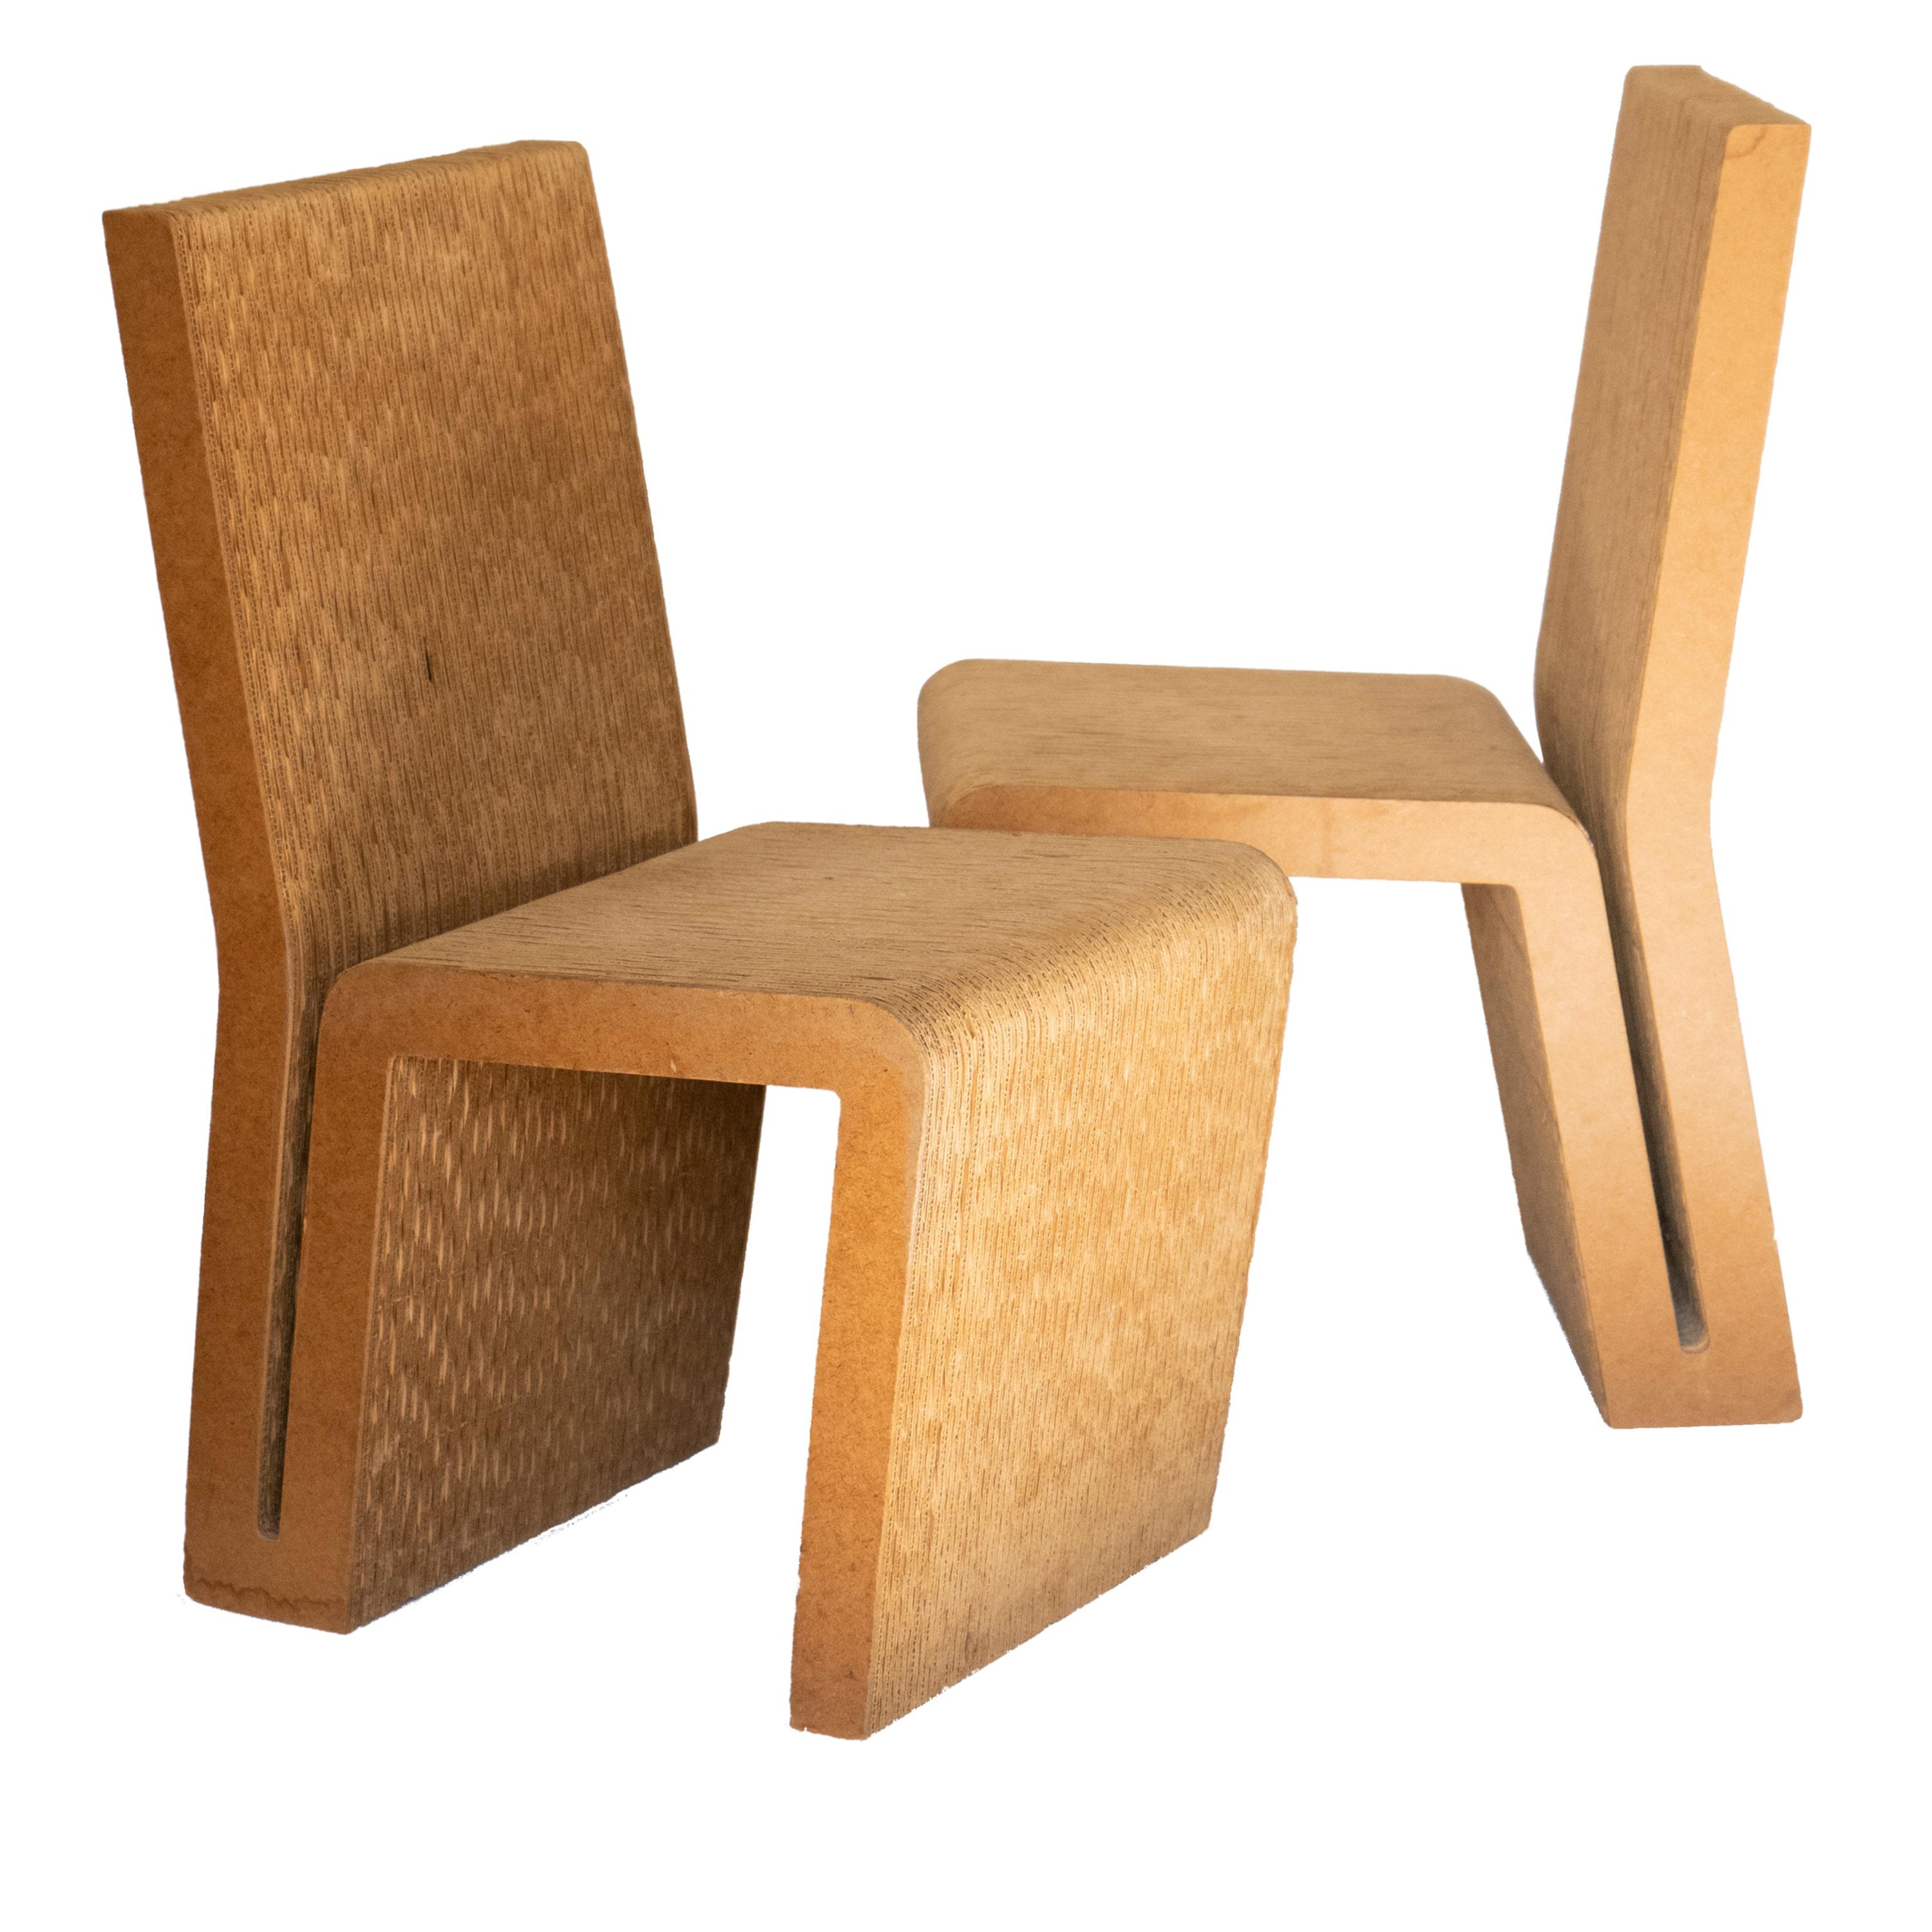 Easy Edges Cardboard Chair by Frank Gehry, Early 1970s Model For Sale